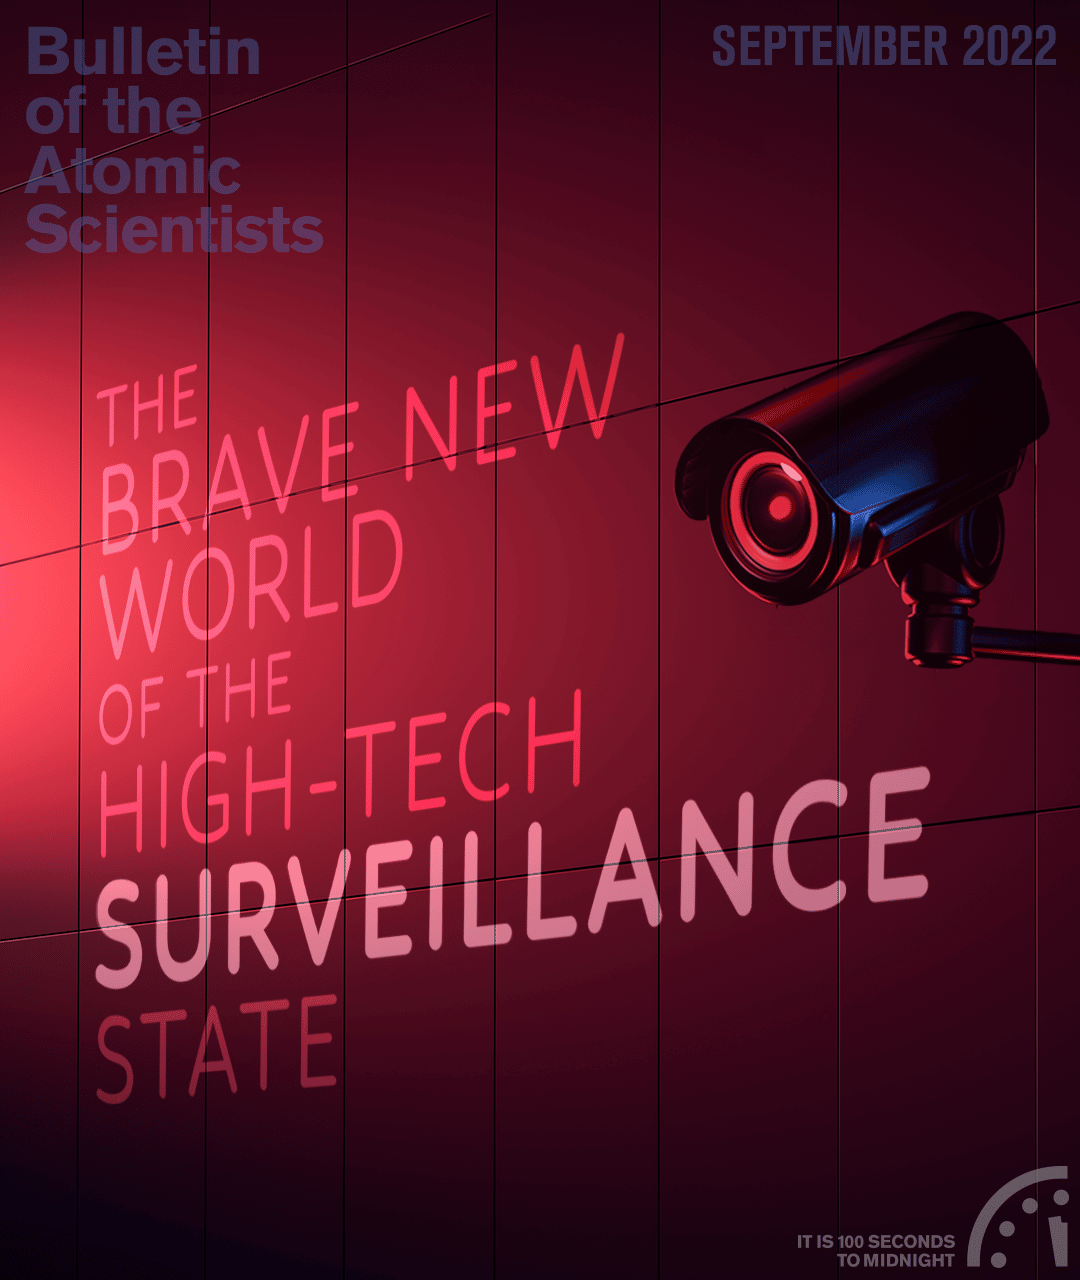 Sept magazine cover The brave new world of the high tech surveillance state